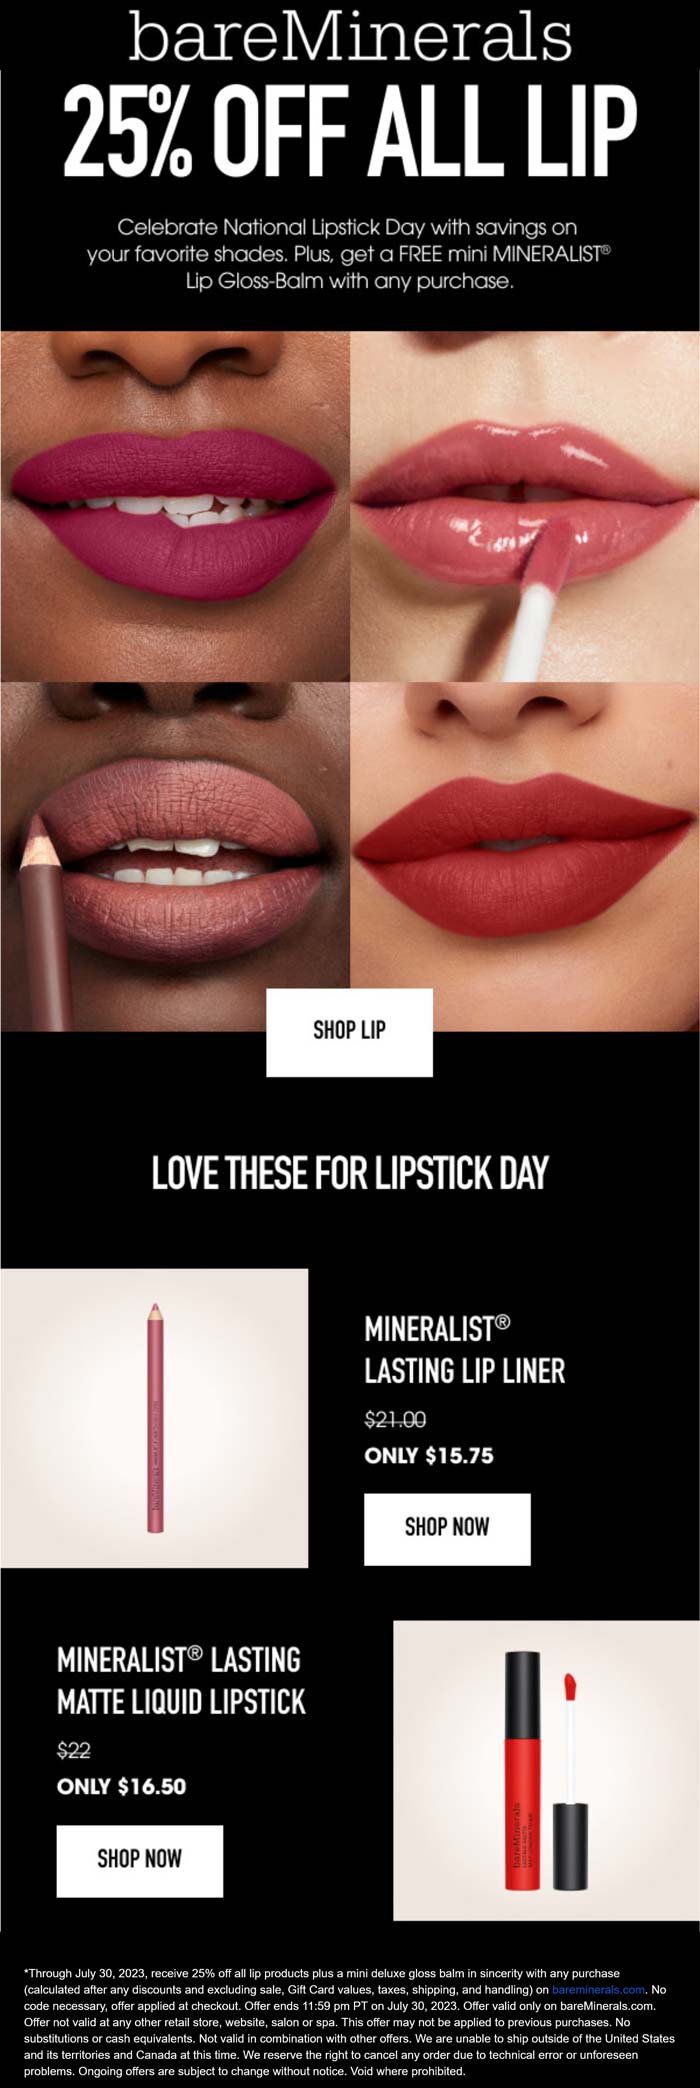 bareMinerals stores Coupon  25% off all lip + free gloss on any purchase at bareMinerals #bareminerals 